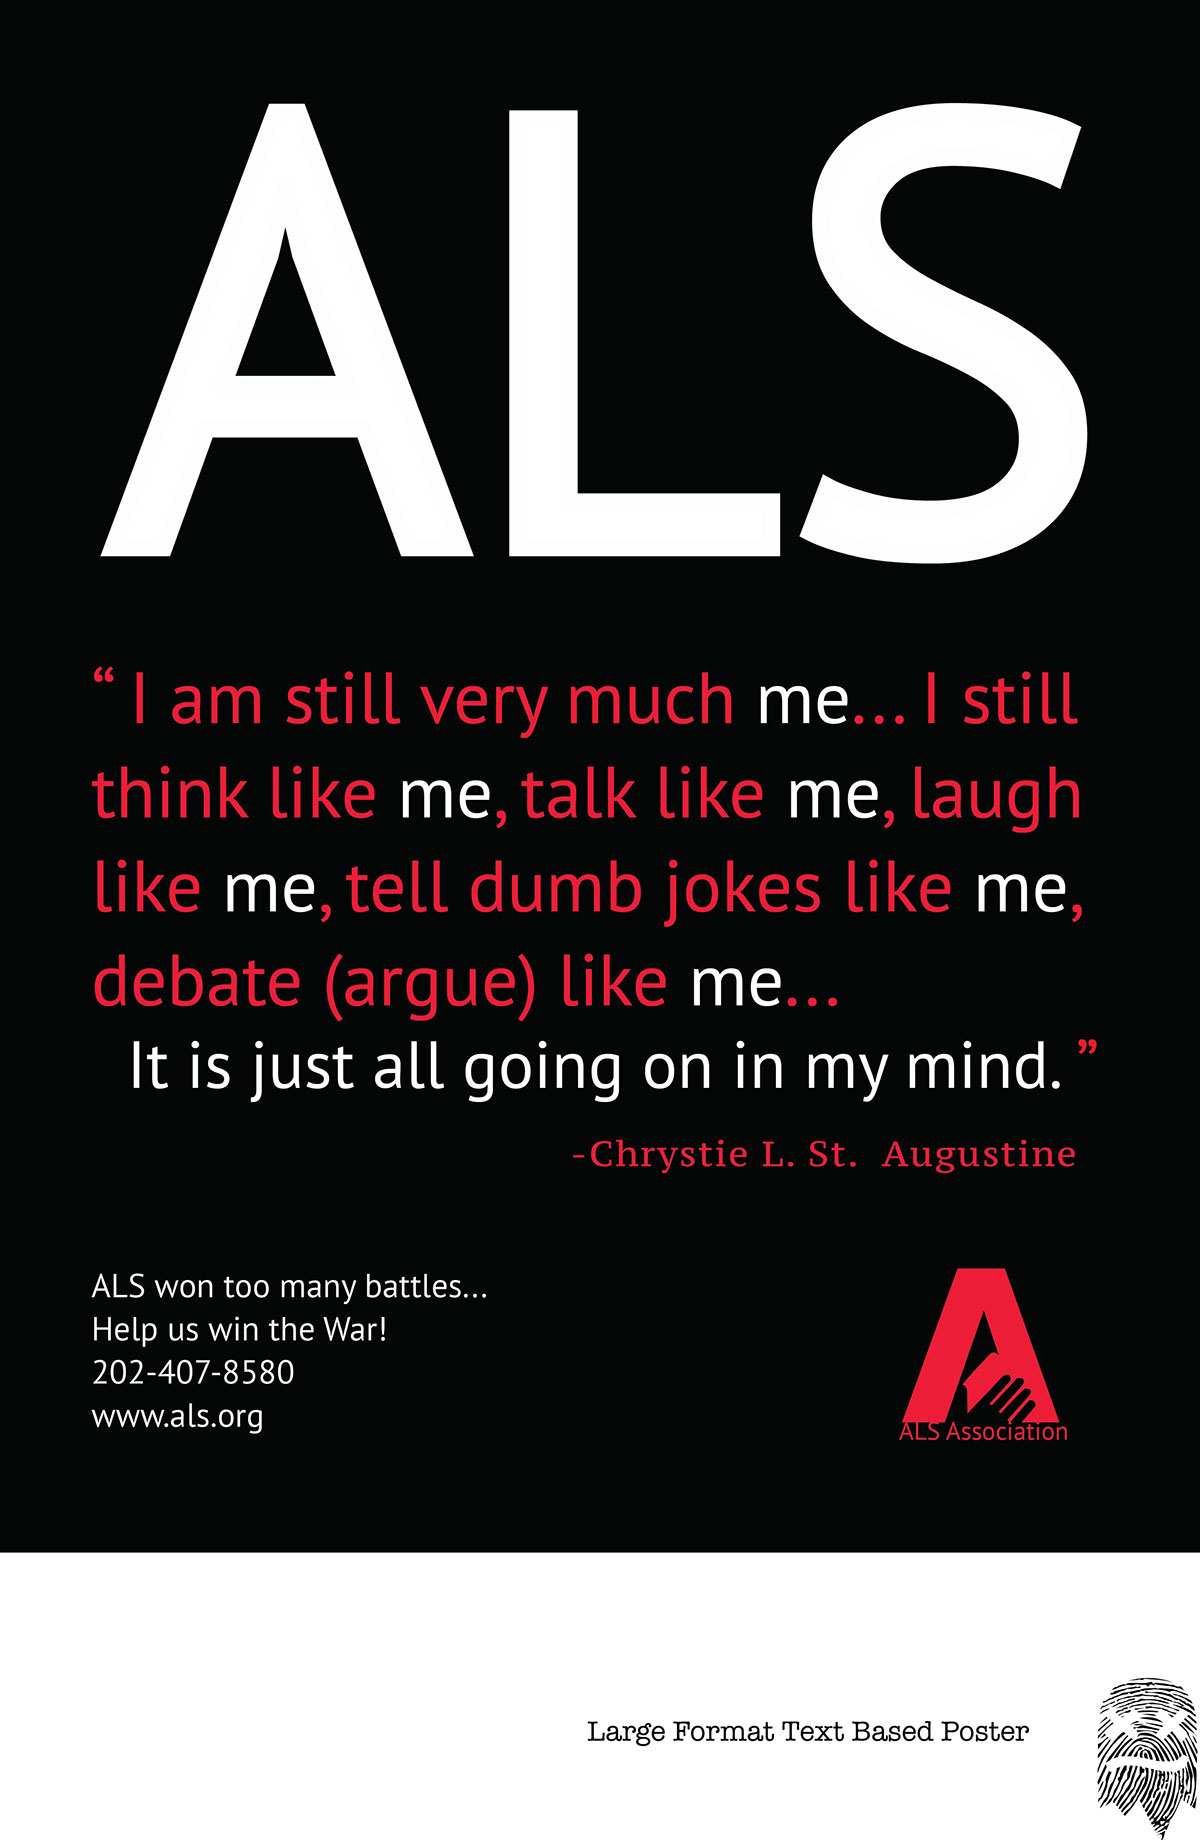 ALS Amyotrophic lateral sclerosis Lou Gehrig's Disease